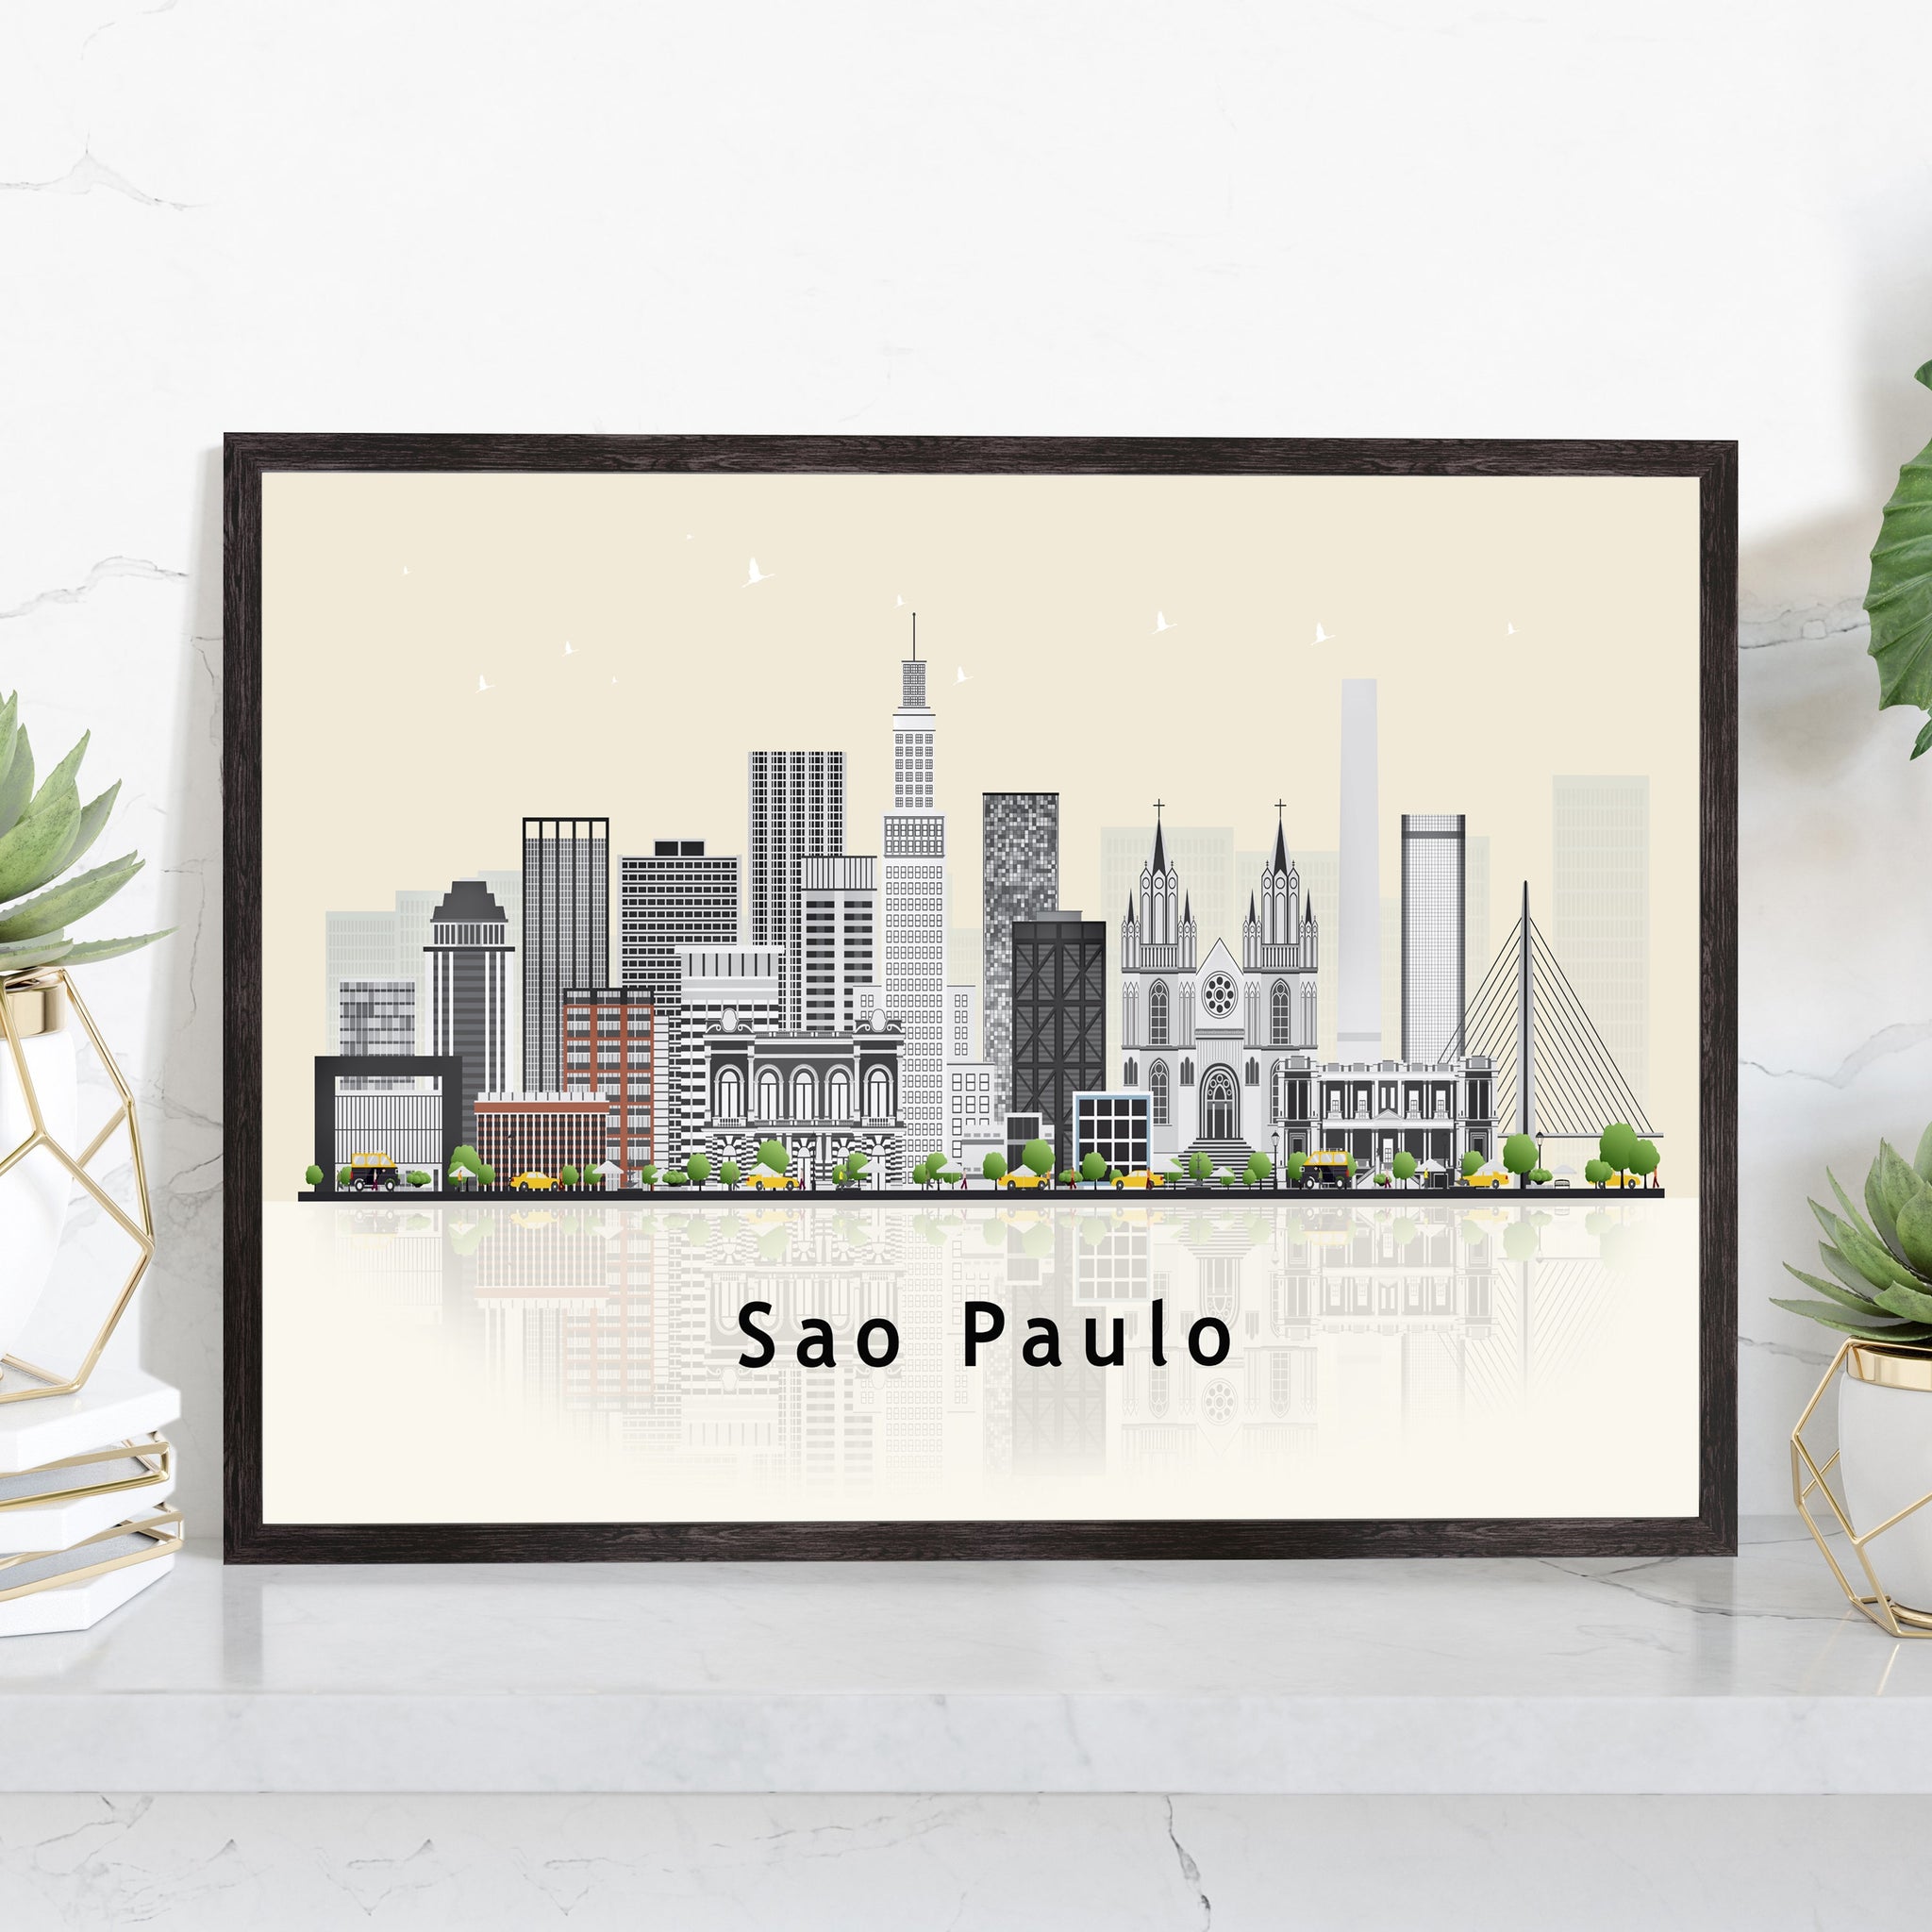 SAO PAULO Brazil Illustration skyline poster, Modern skyline cityscape poster, City skyline landmark map poster, Home wall decoration